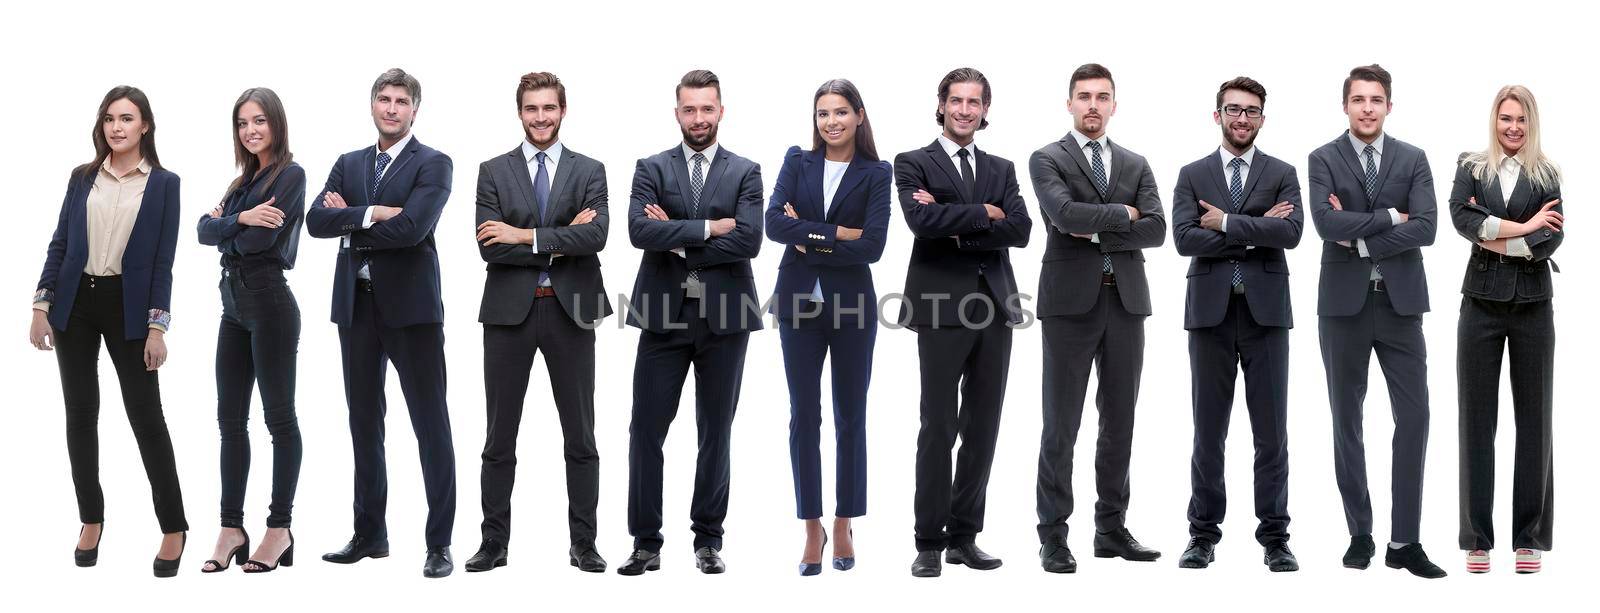 group of young successful entrepreneurs standing in a row. isolated on white background.